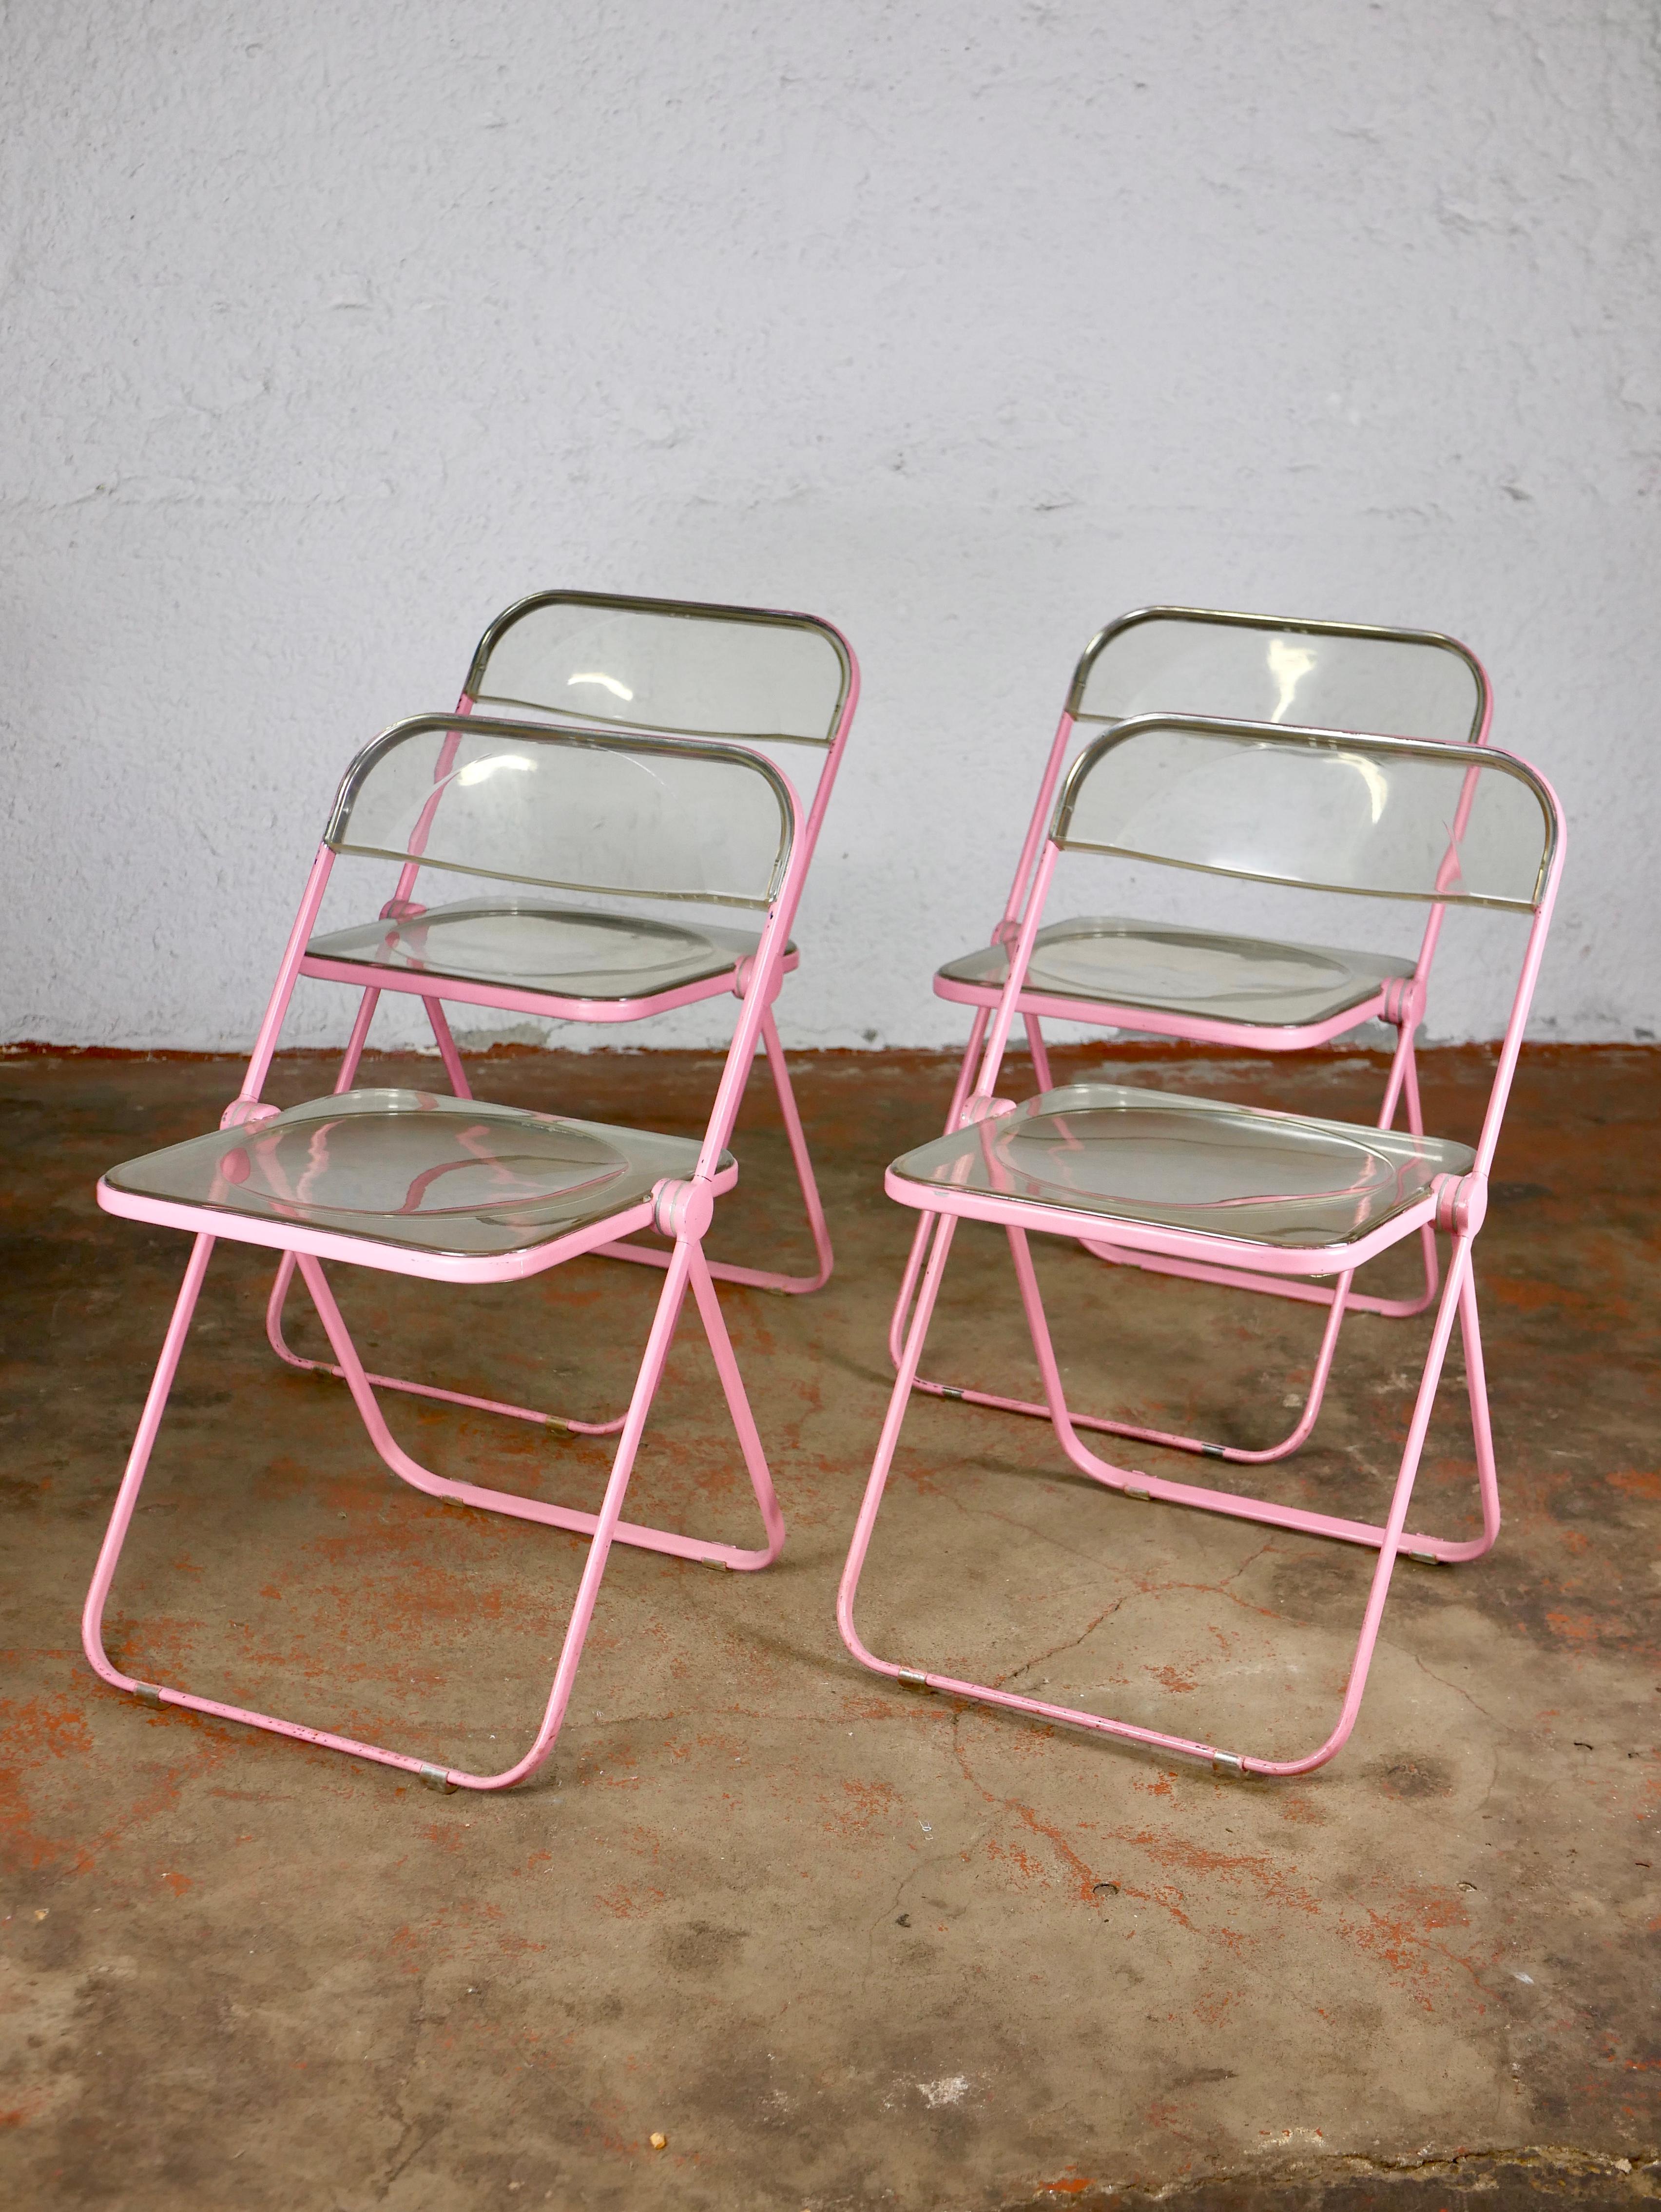 Adorable set of 4 pink folding chairs, Plia model, by Giancarlo Piretti for Castelli, made in Italy in the 1970s. Plexi back and seat, the metal structure has been painted in pink pastel by his former owners.
Overall good condition : peeling paint